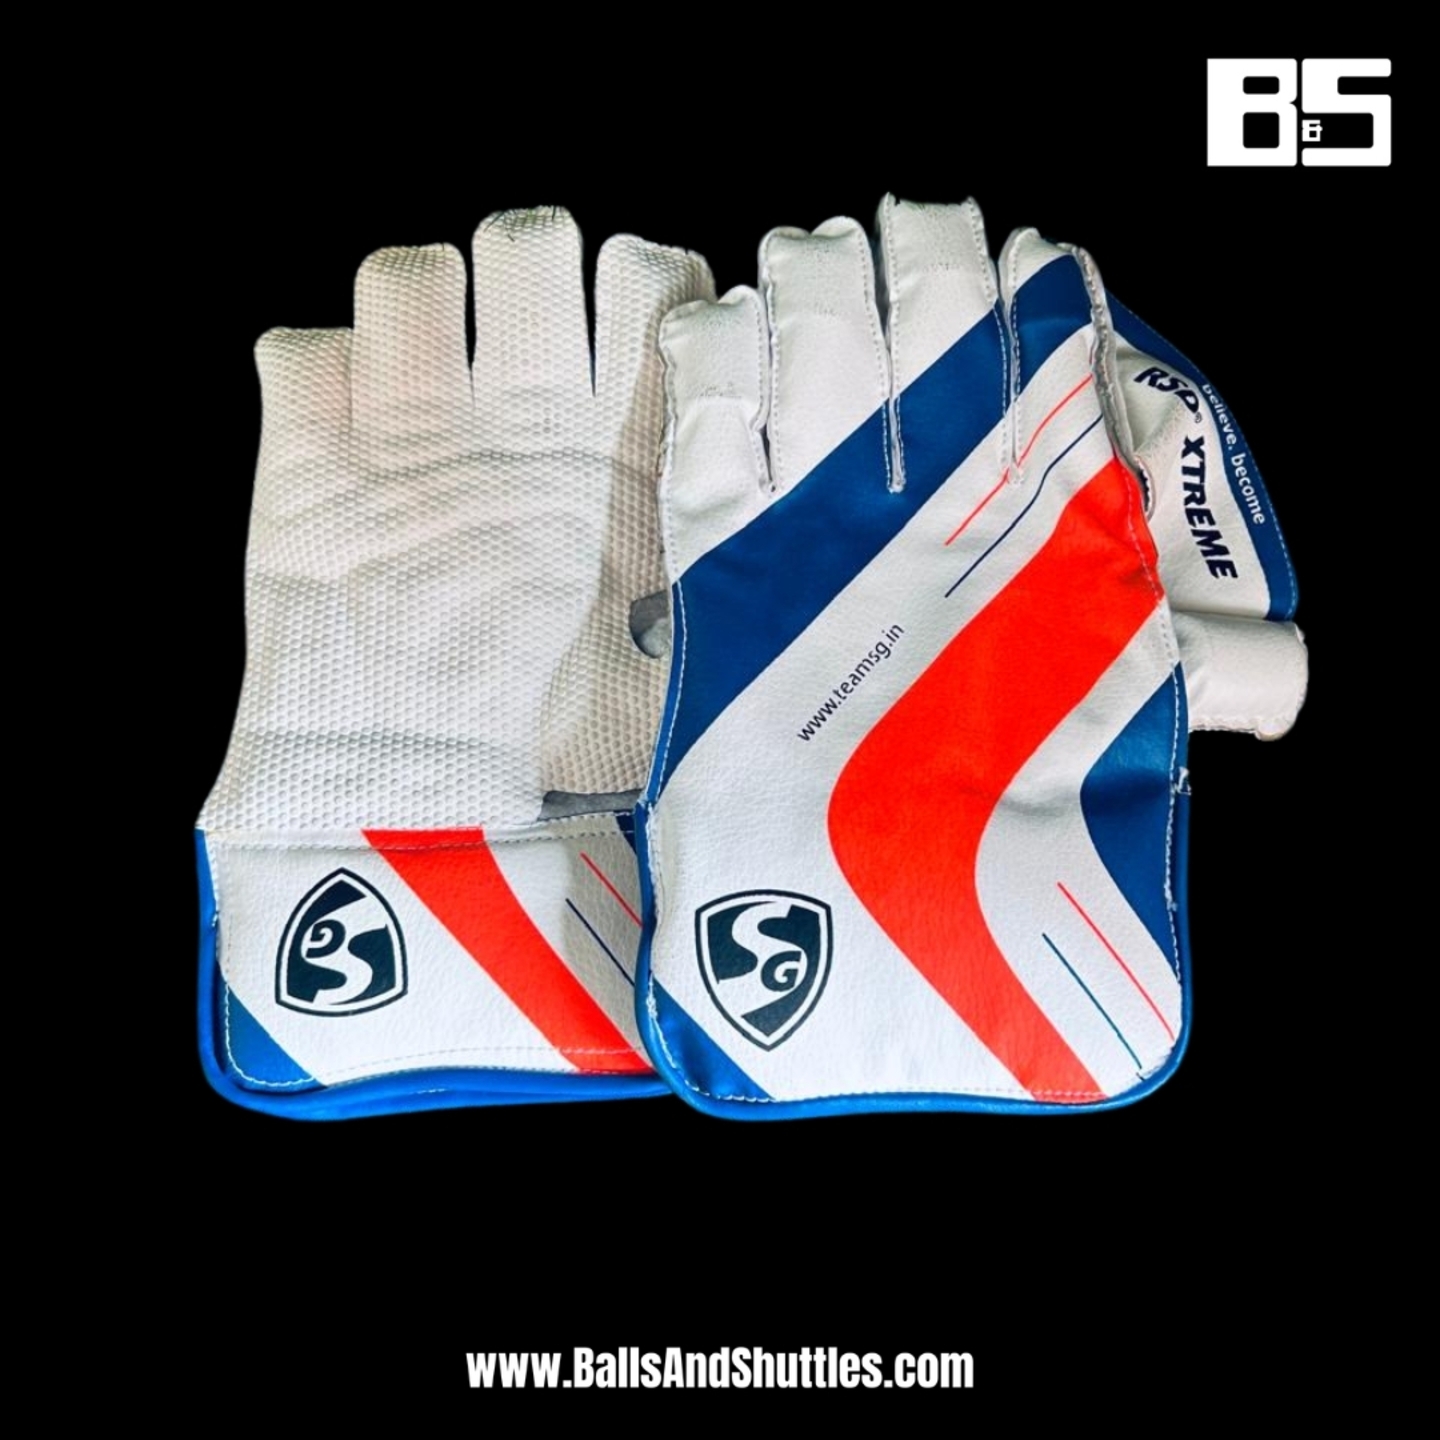 SG RSD XTREME WICKET KEEPING GLOVES | SG YOUTH SIZE WICKET KEEPING GLOVES